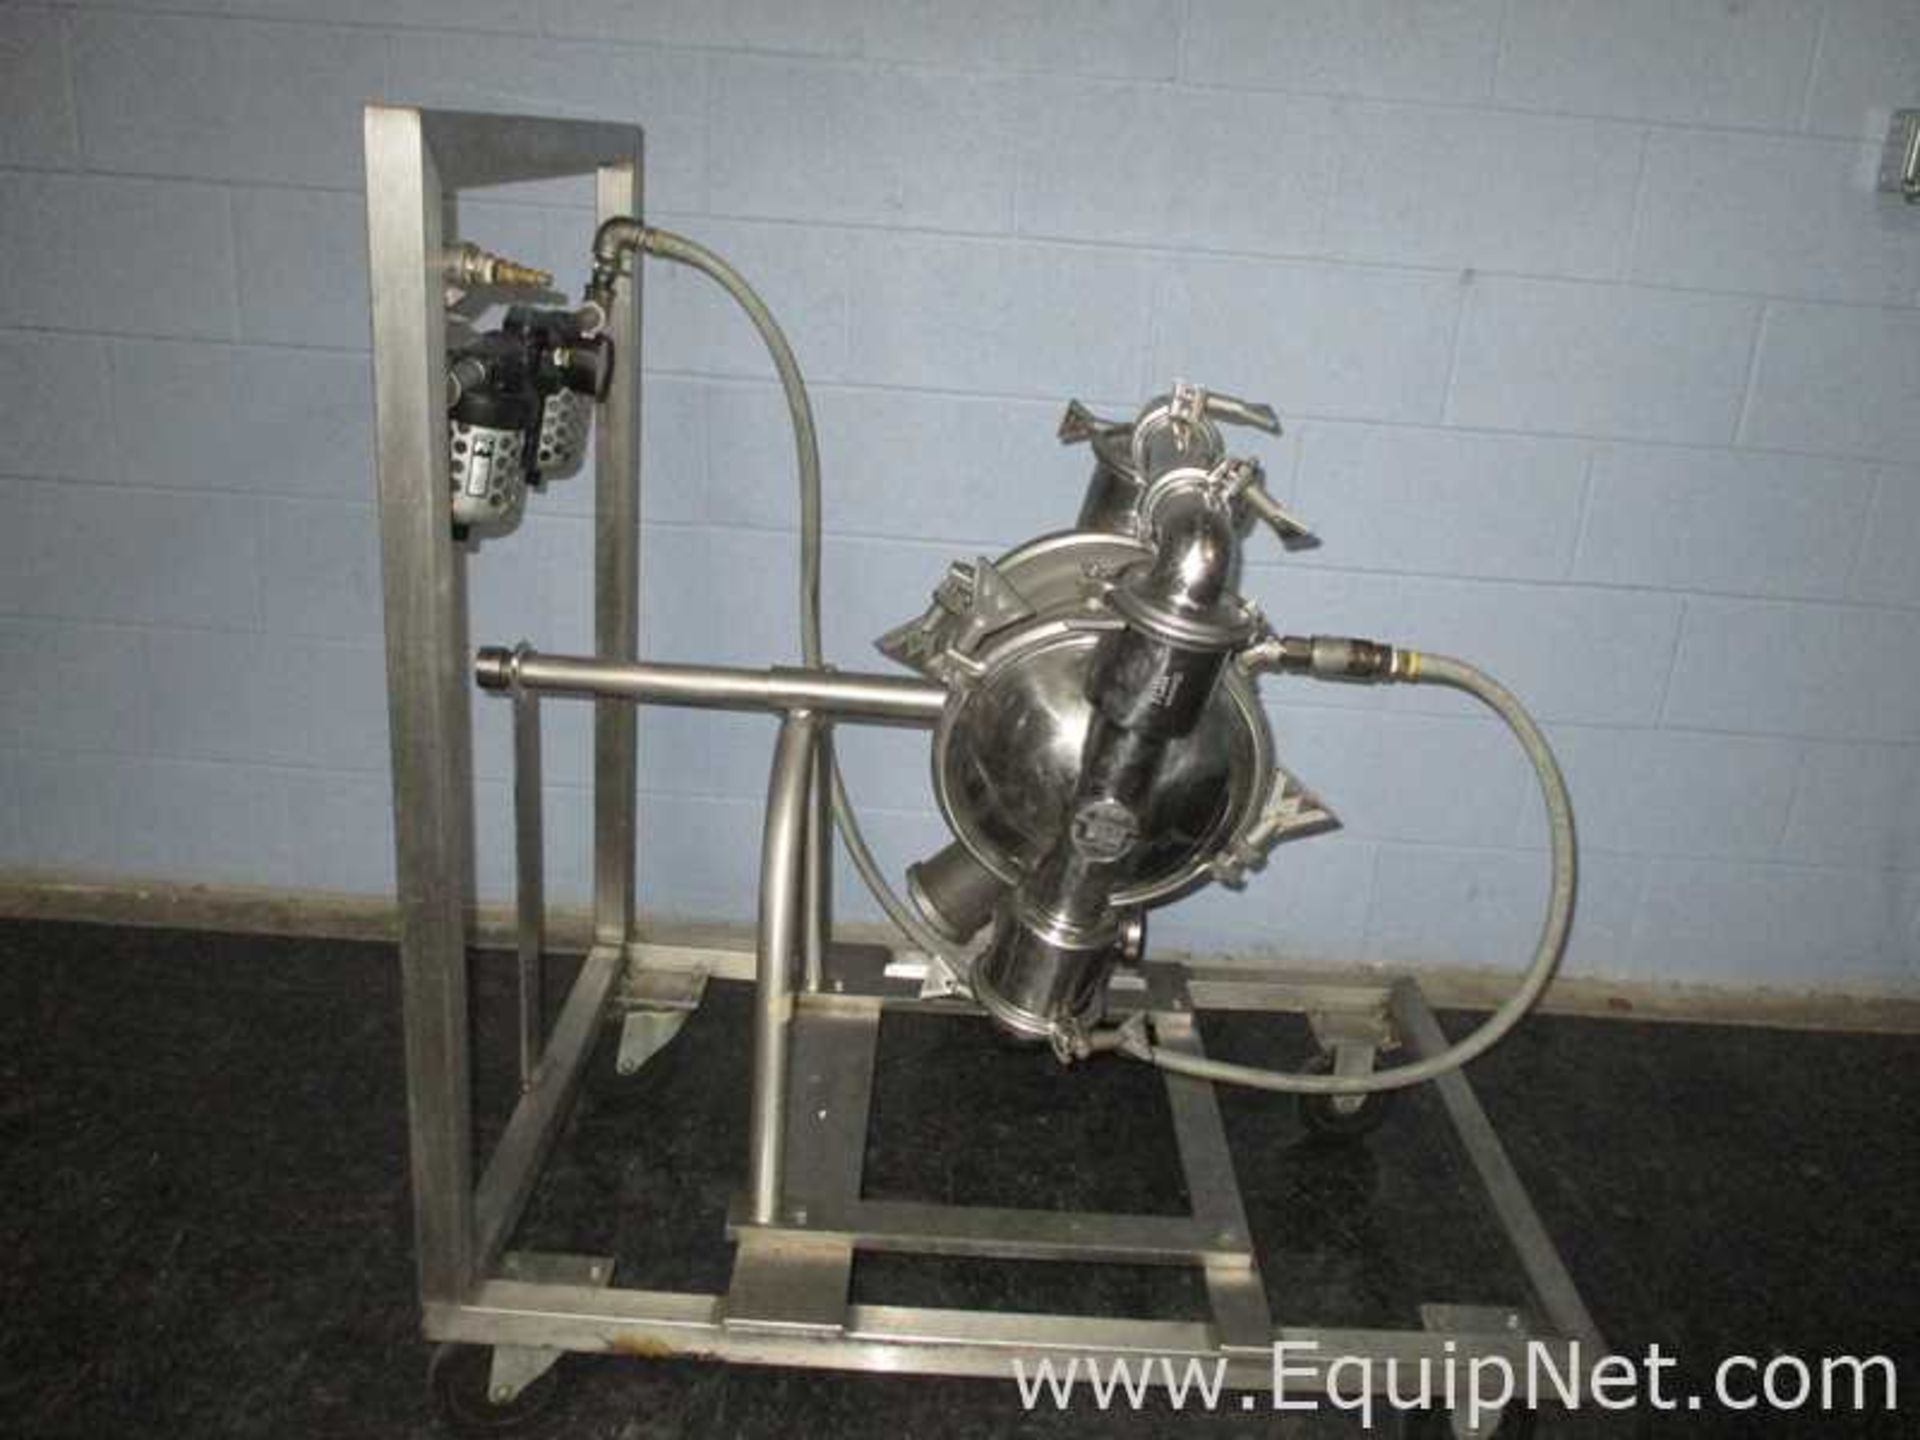 Stainless Steel Diaphragm Pump - Image 4 of 5